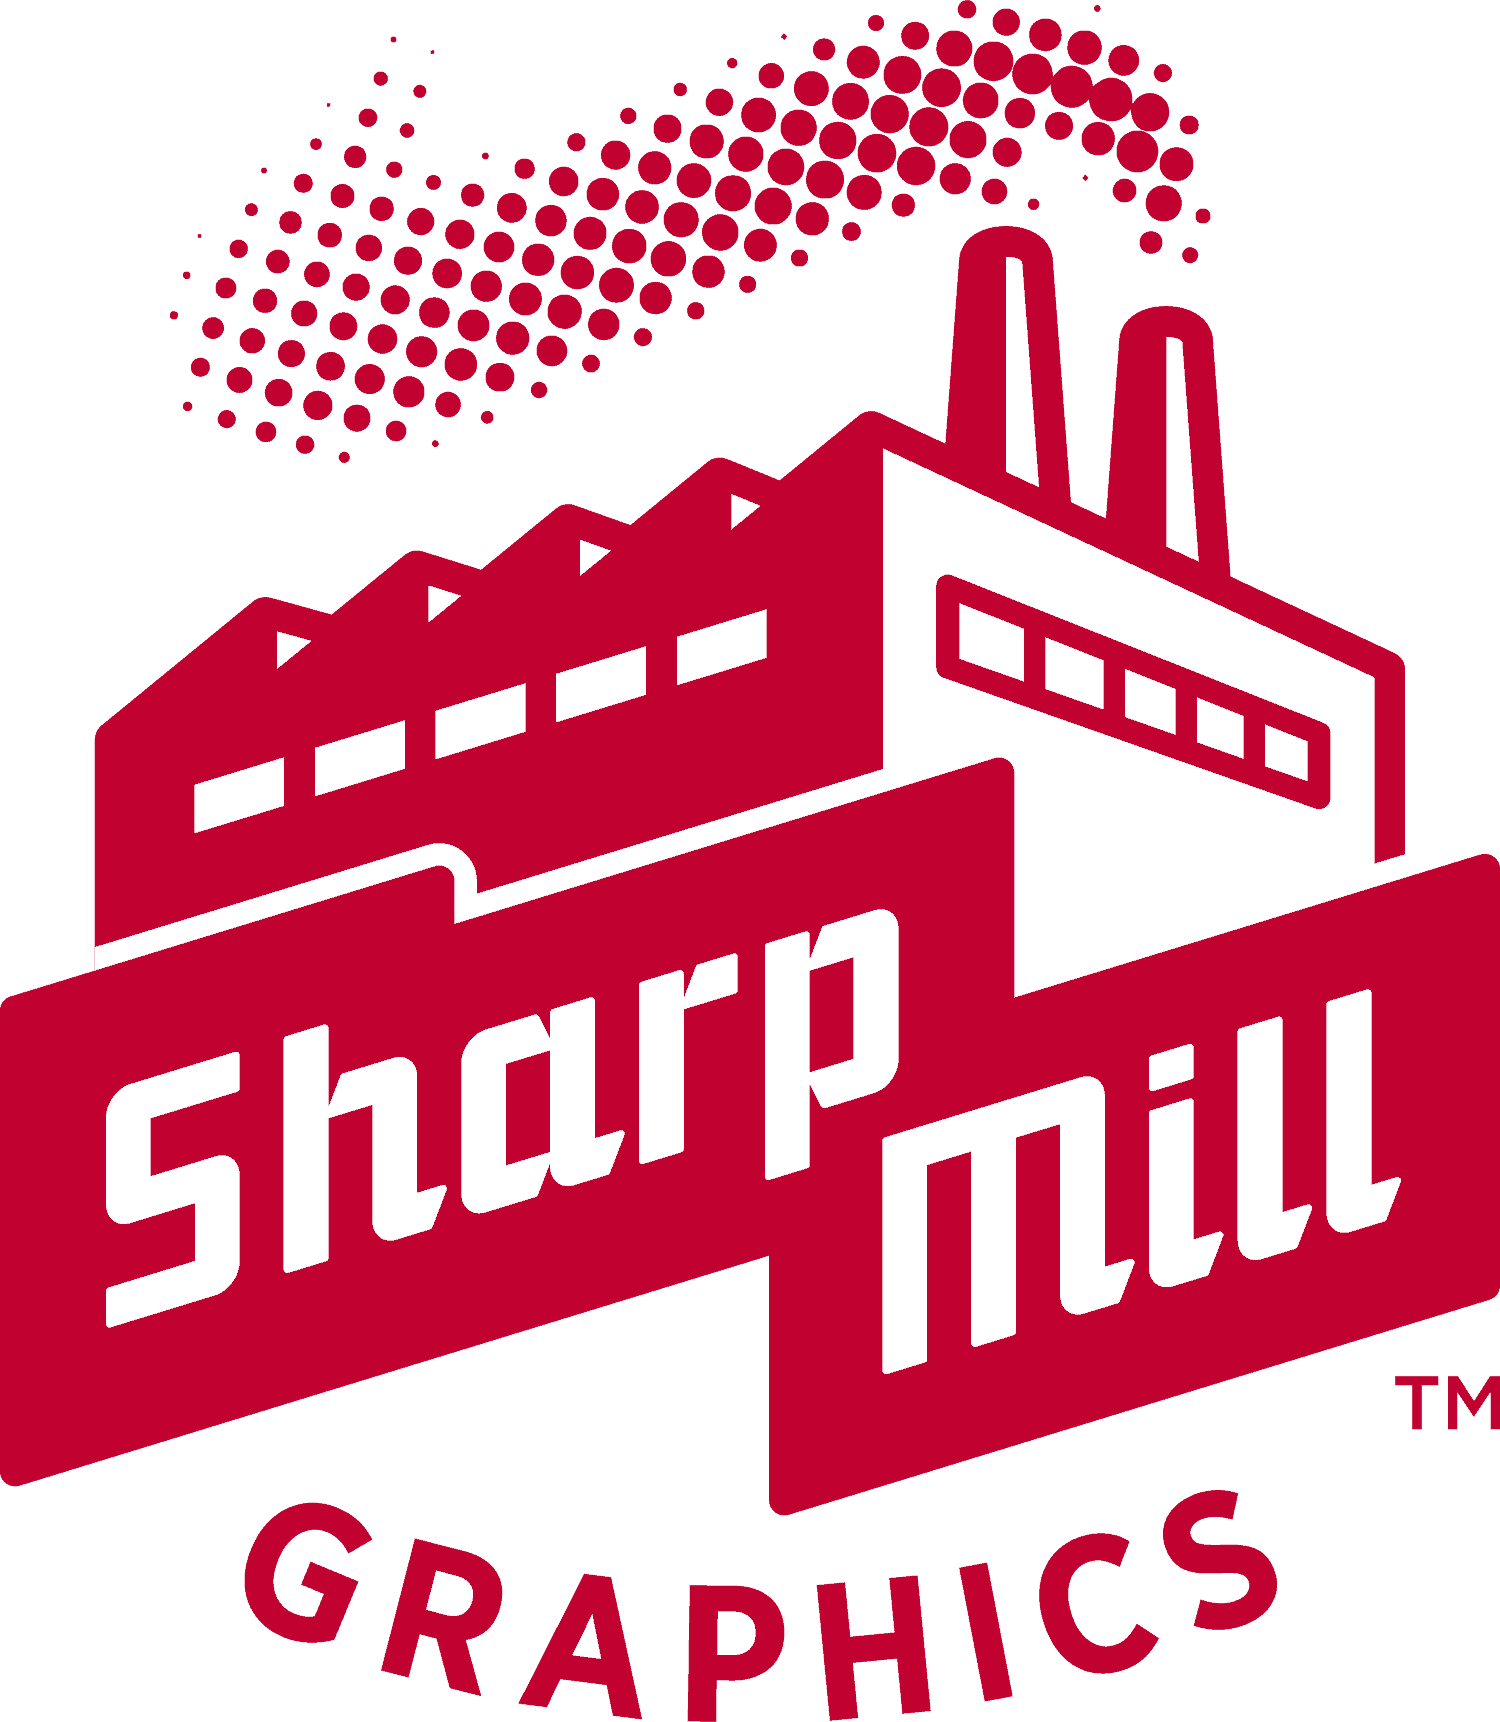 Sharp mill logo on a red background.